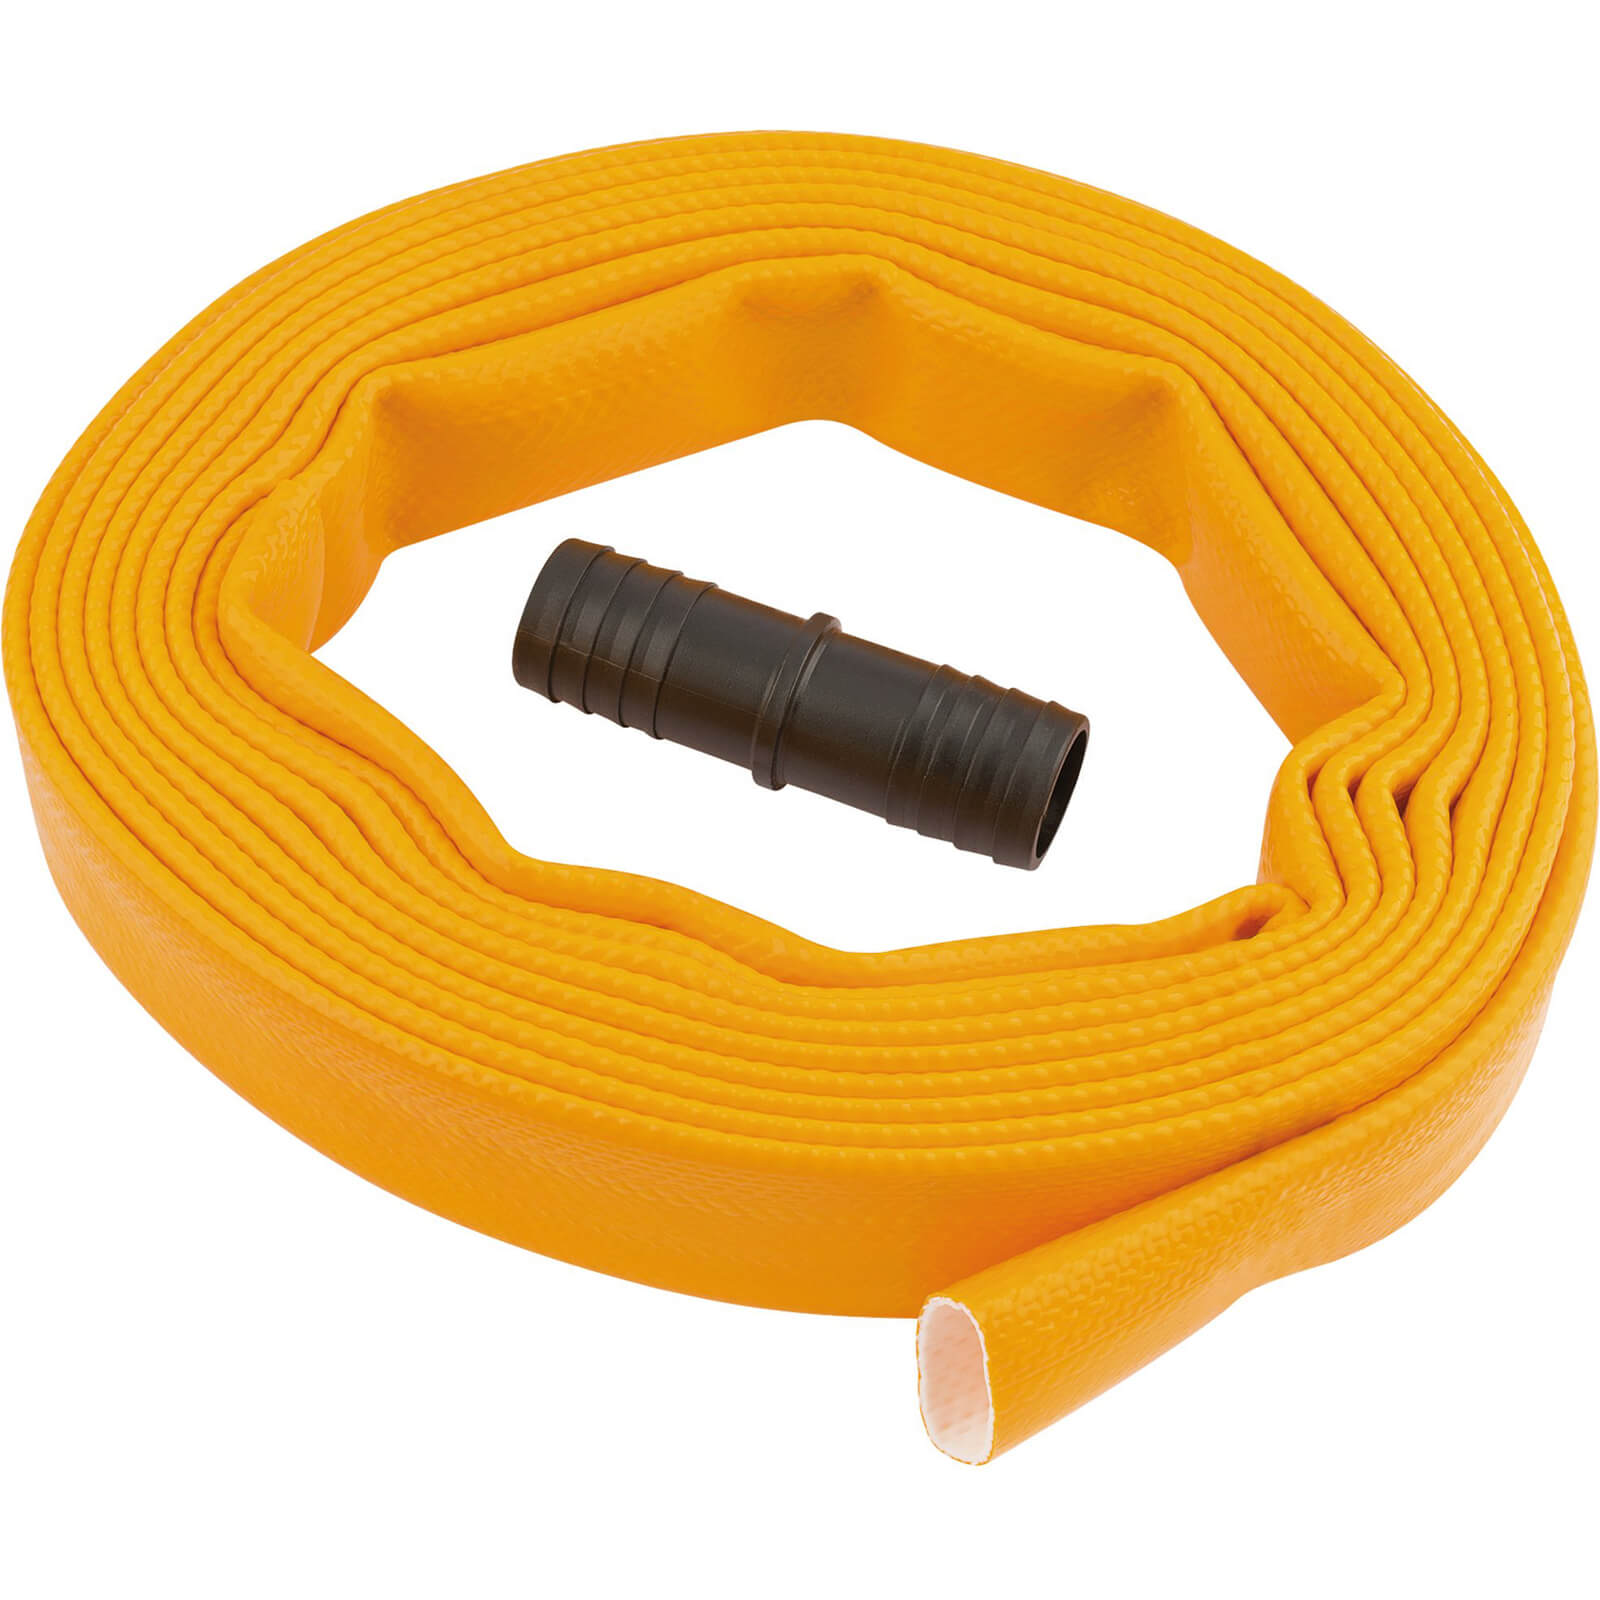 Image of Draper Lay Flat Hose and Connection Adaptor 25mm 5m